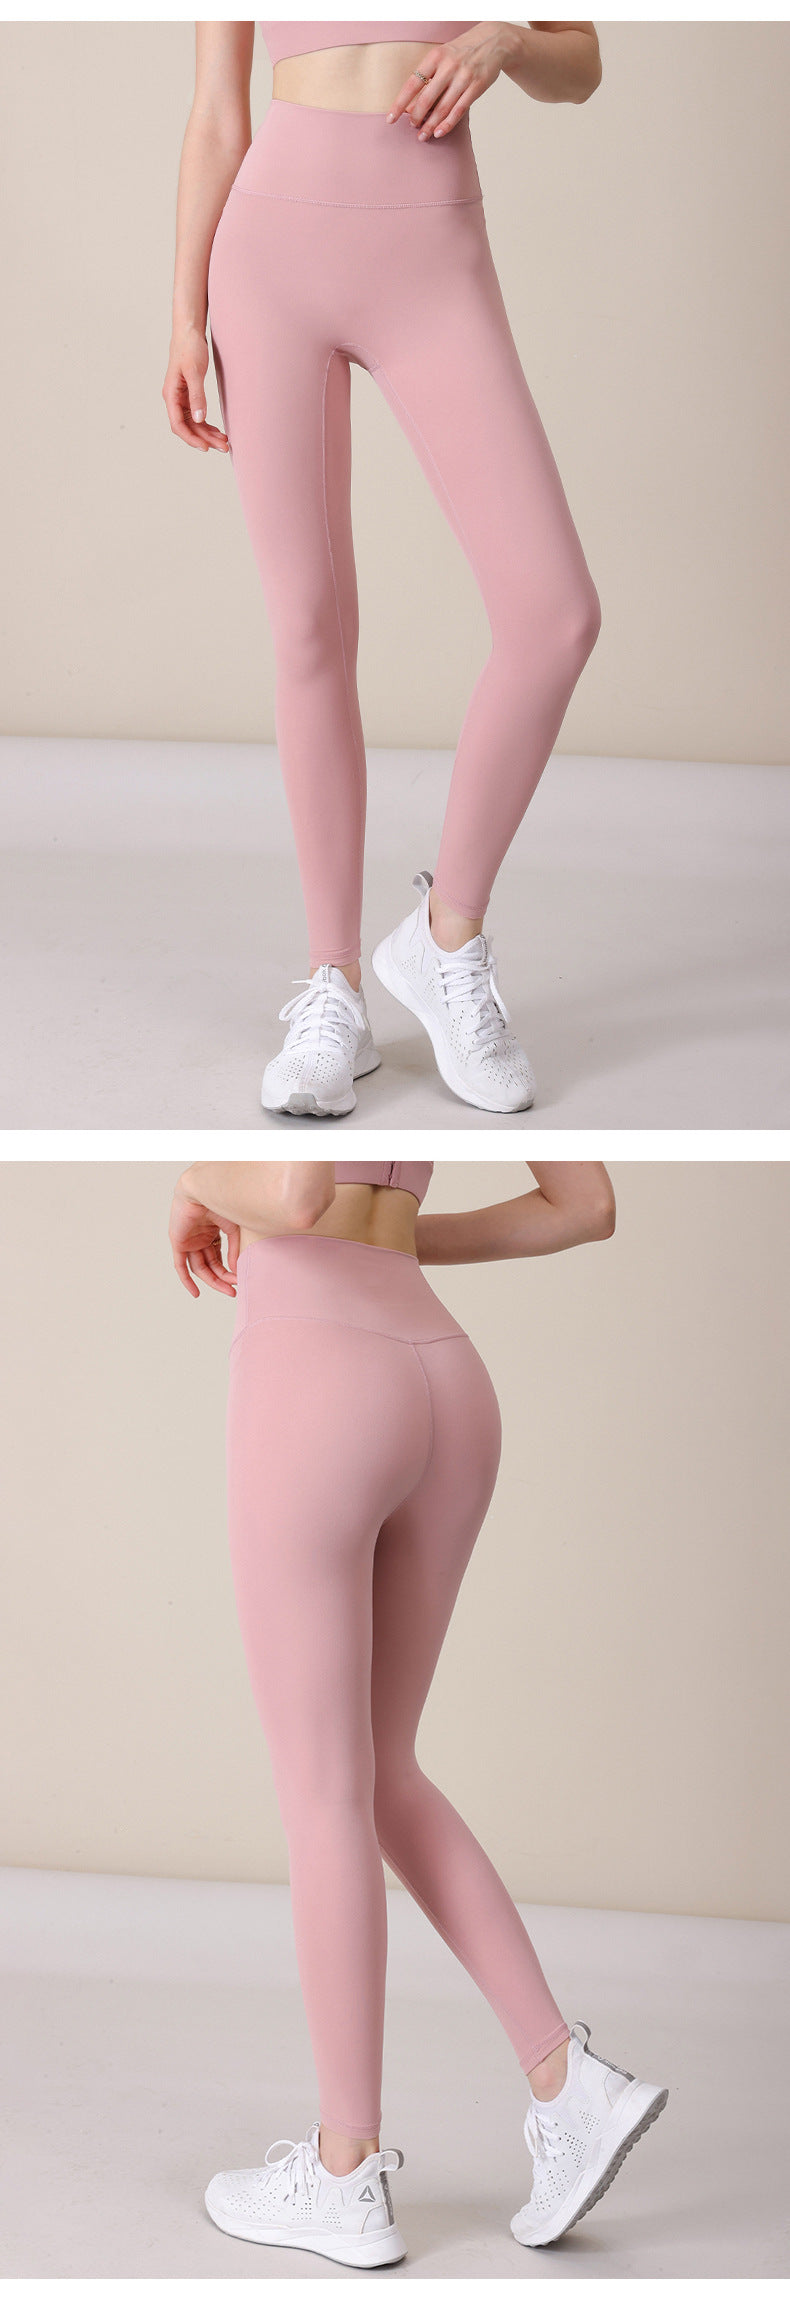 2023.09 New non-size yoga leggings high waist hip lifting abdomen seamless track pants fitness running nude tight cropped pants